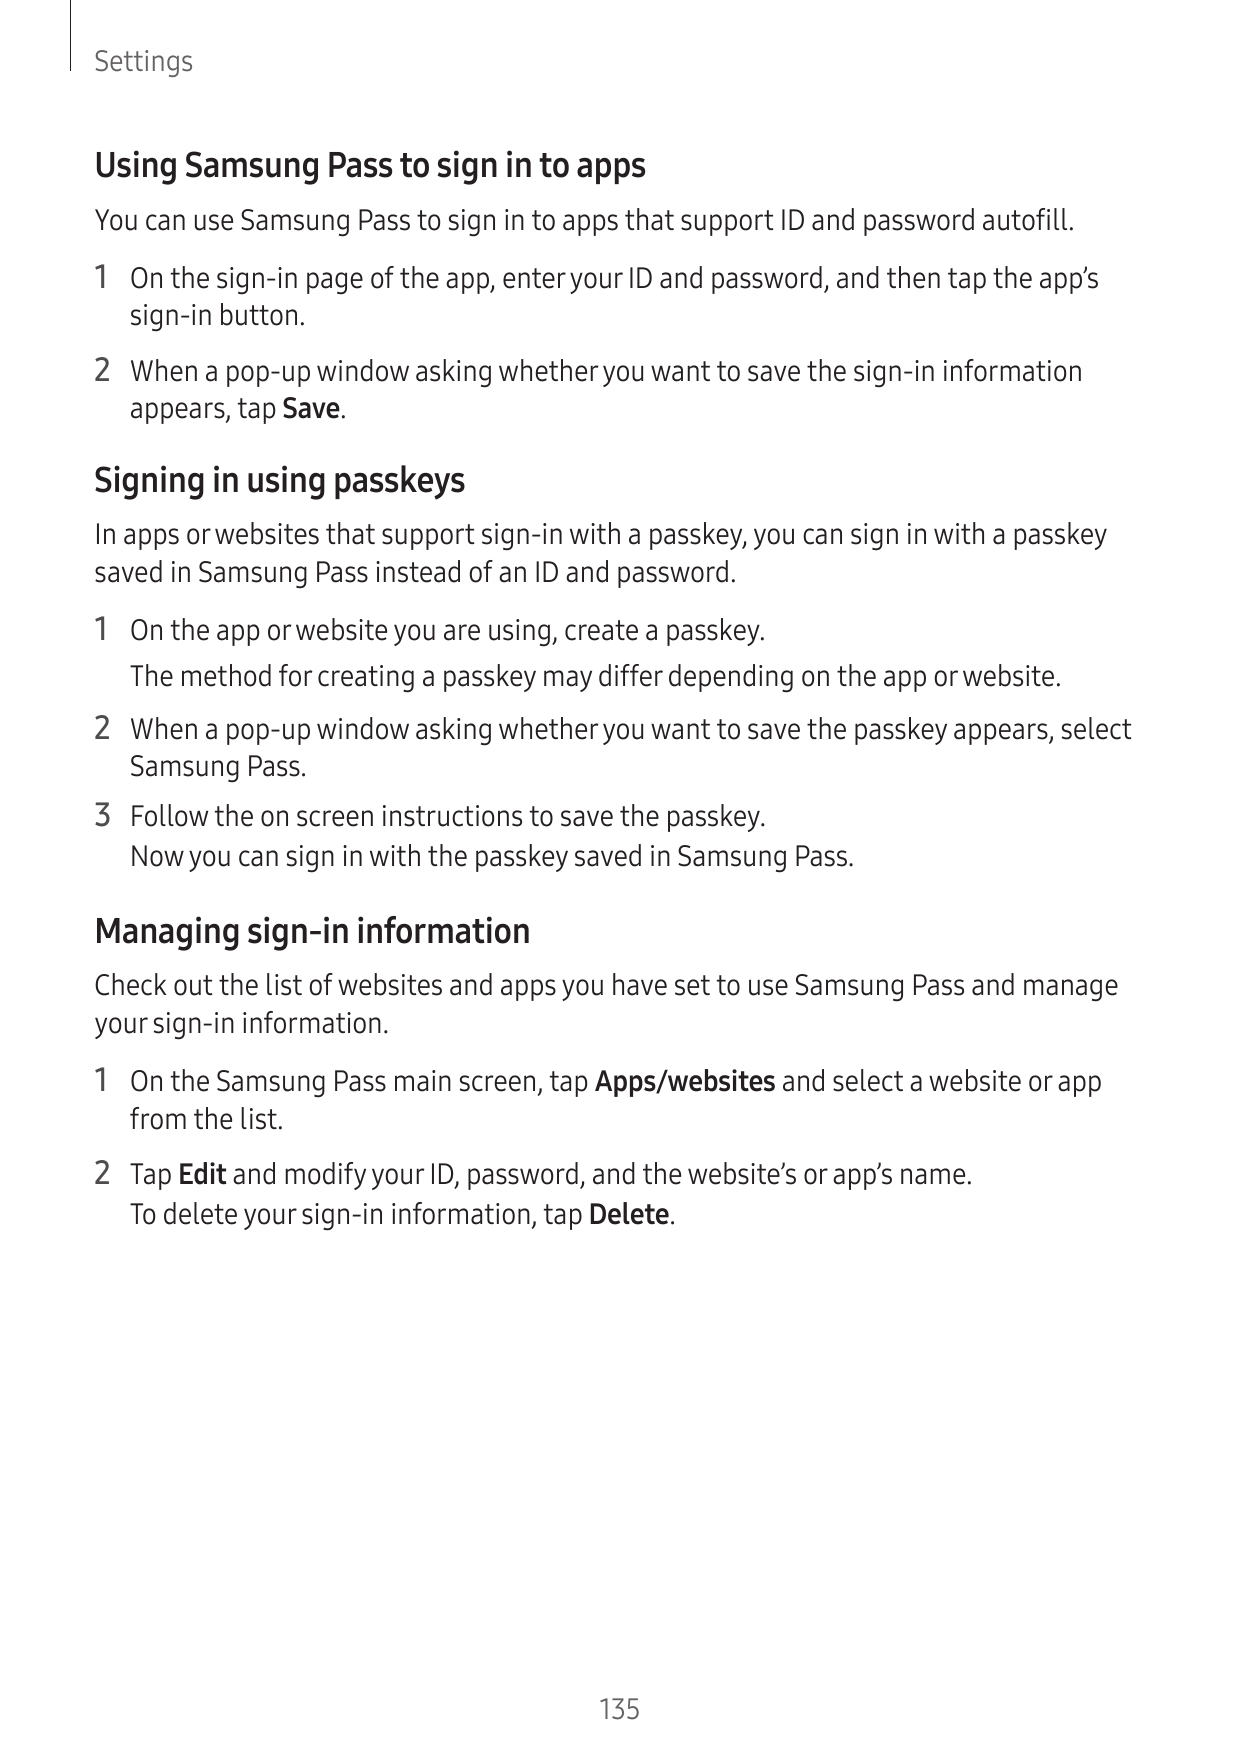 SettingsUsing Samsung Pass to sign in to appsYou can use Samsung Pass to sign in to apps that support ID and password autofill.1